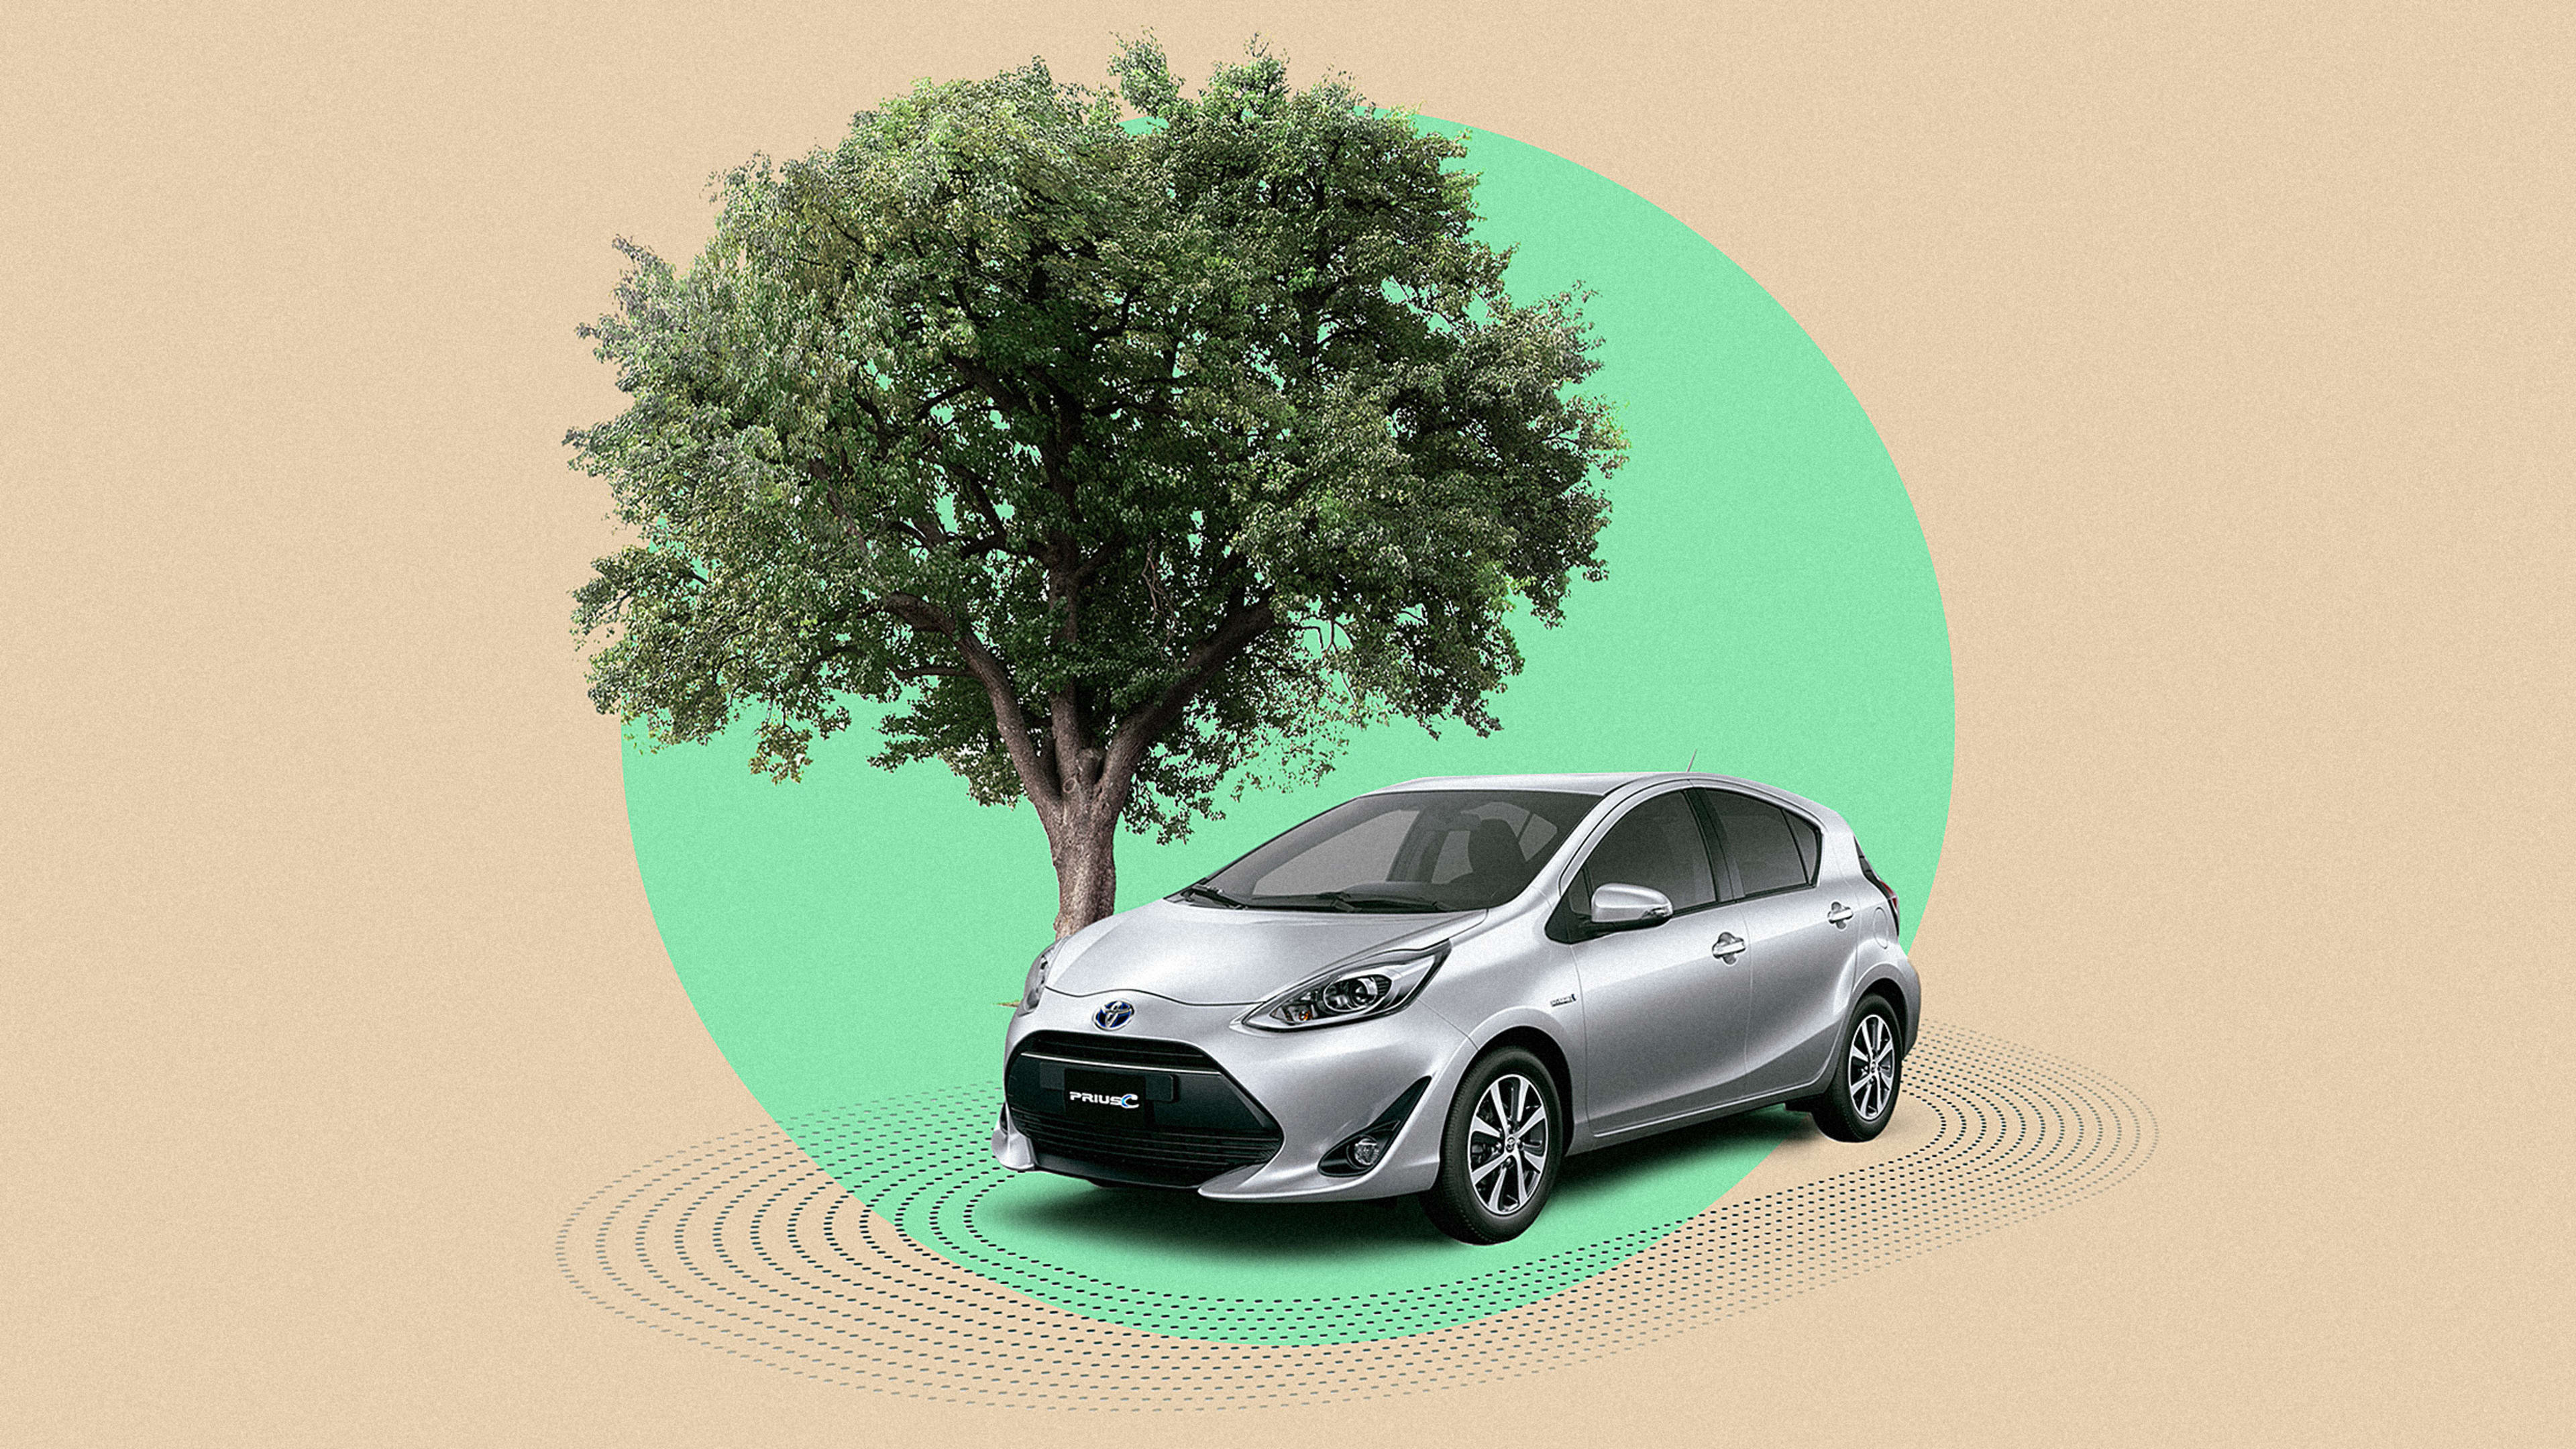 These electric cars will project a sound that . . . makes plants happy?